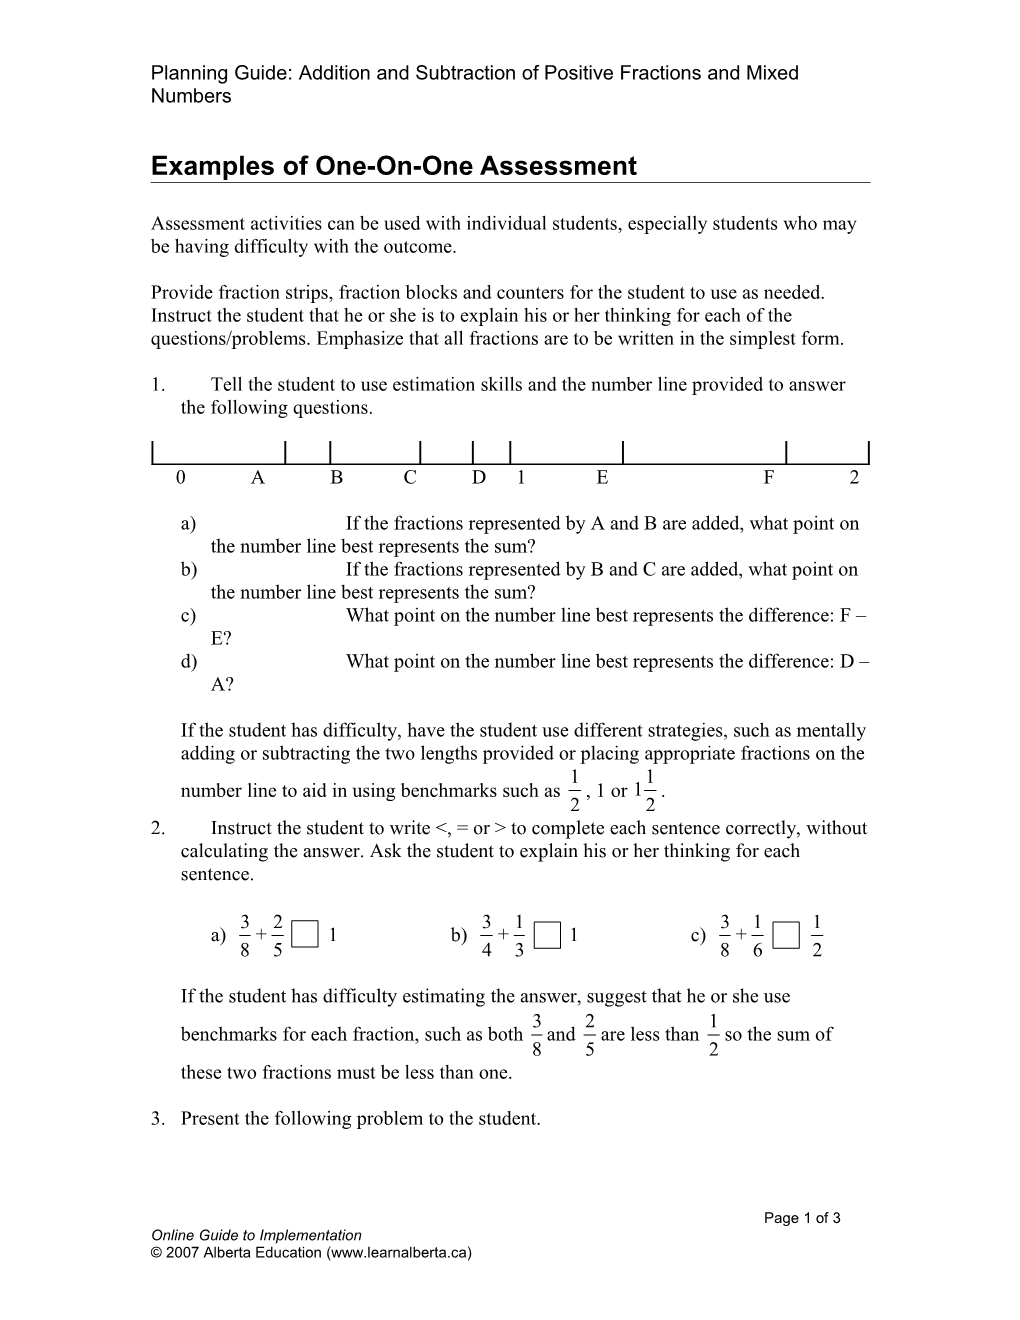 Planning Guide: Addition and Subtraction of Positive Fractions and Mixed Numbers